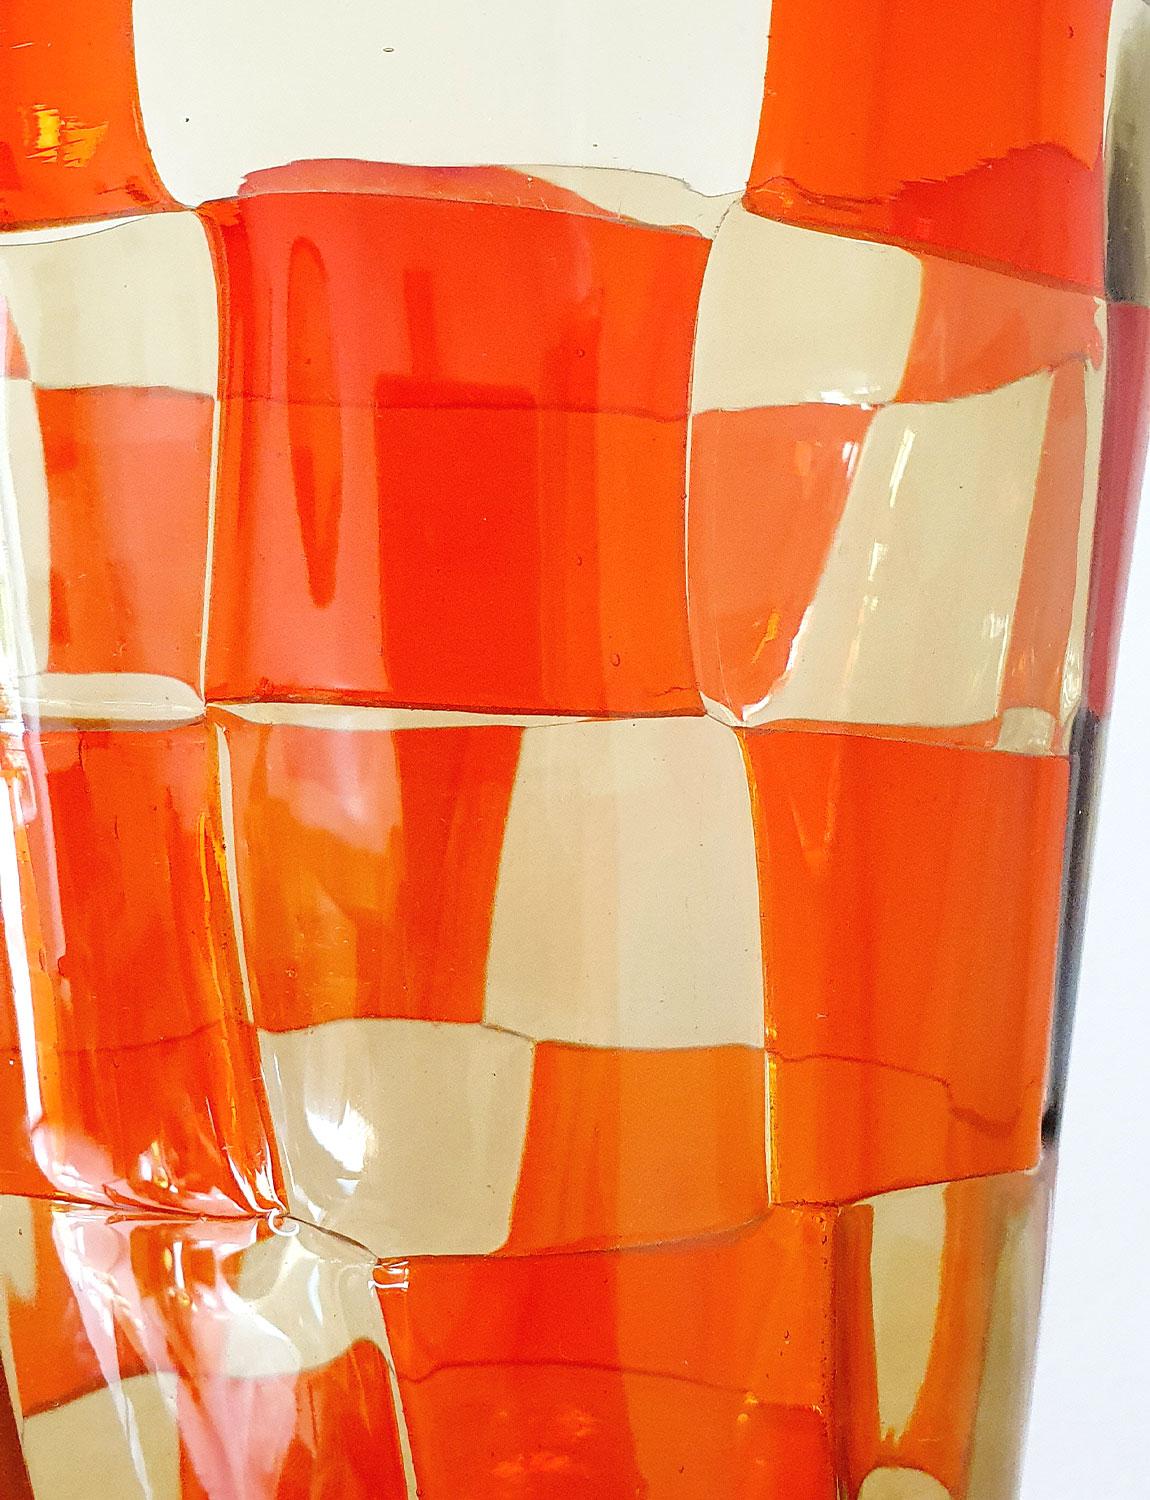 Truly amazing signed 1970s Barovier & Toso vase created using molten glass orange and yellow squares. Barovier & Toso It is extremely difficult to find pieces of such precise craftmanship and beauty from the 70s still in such good condition. Ercole